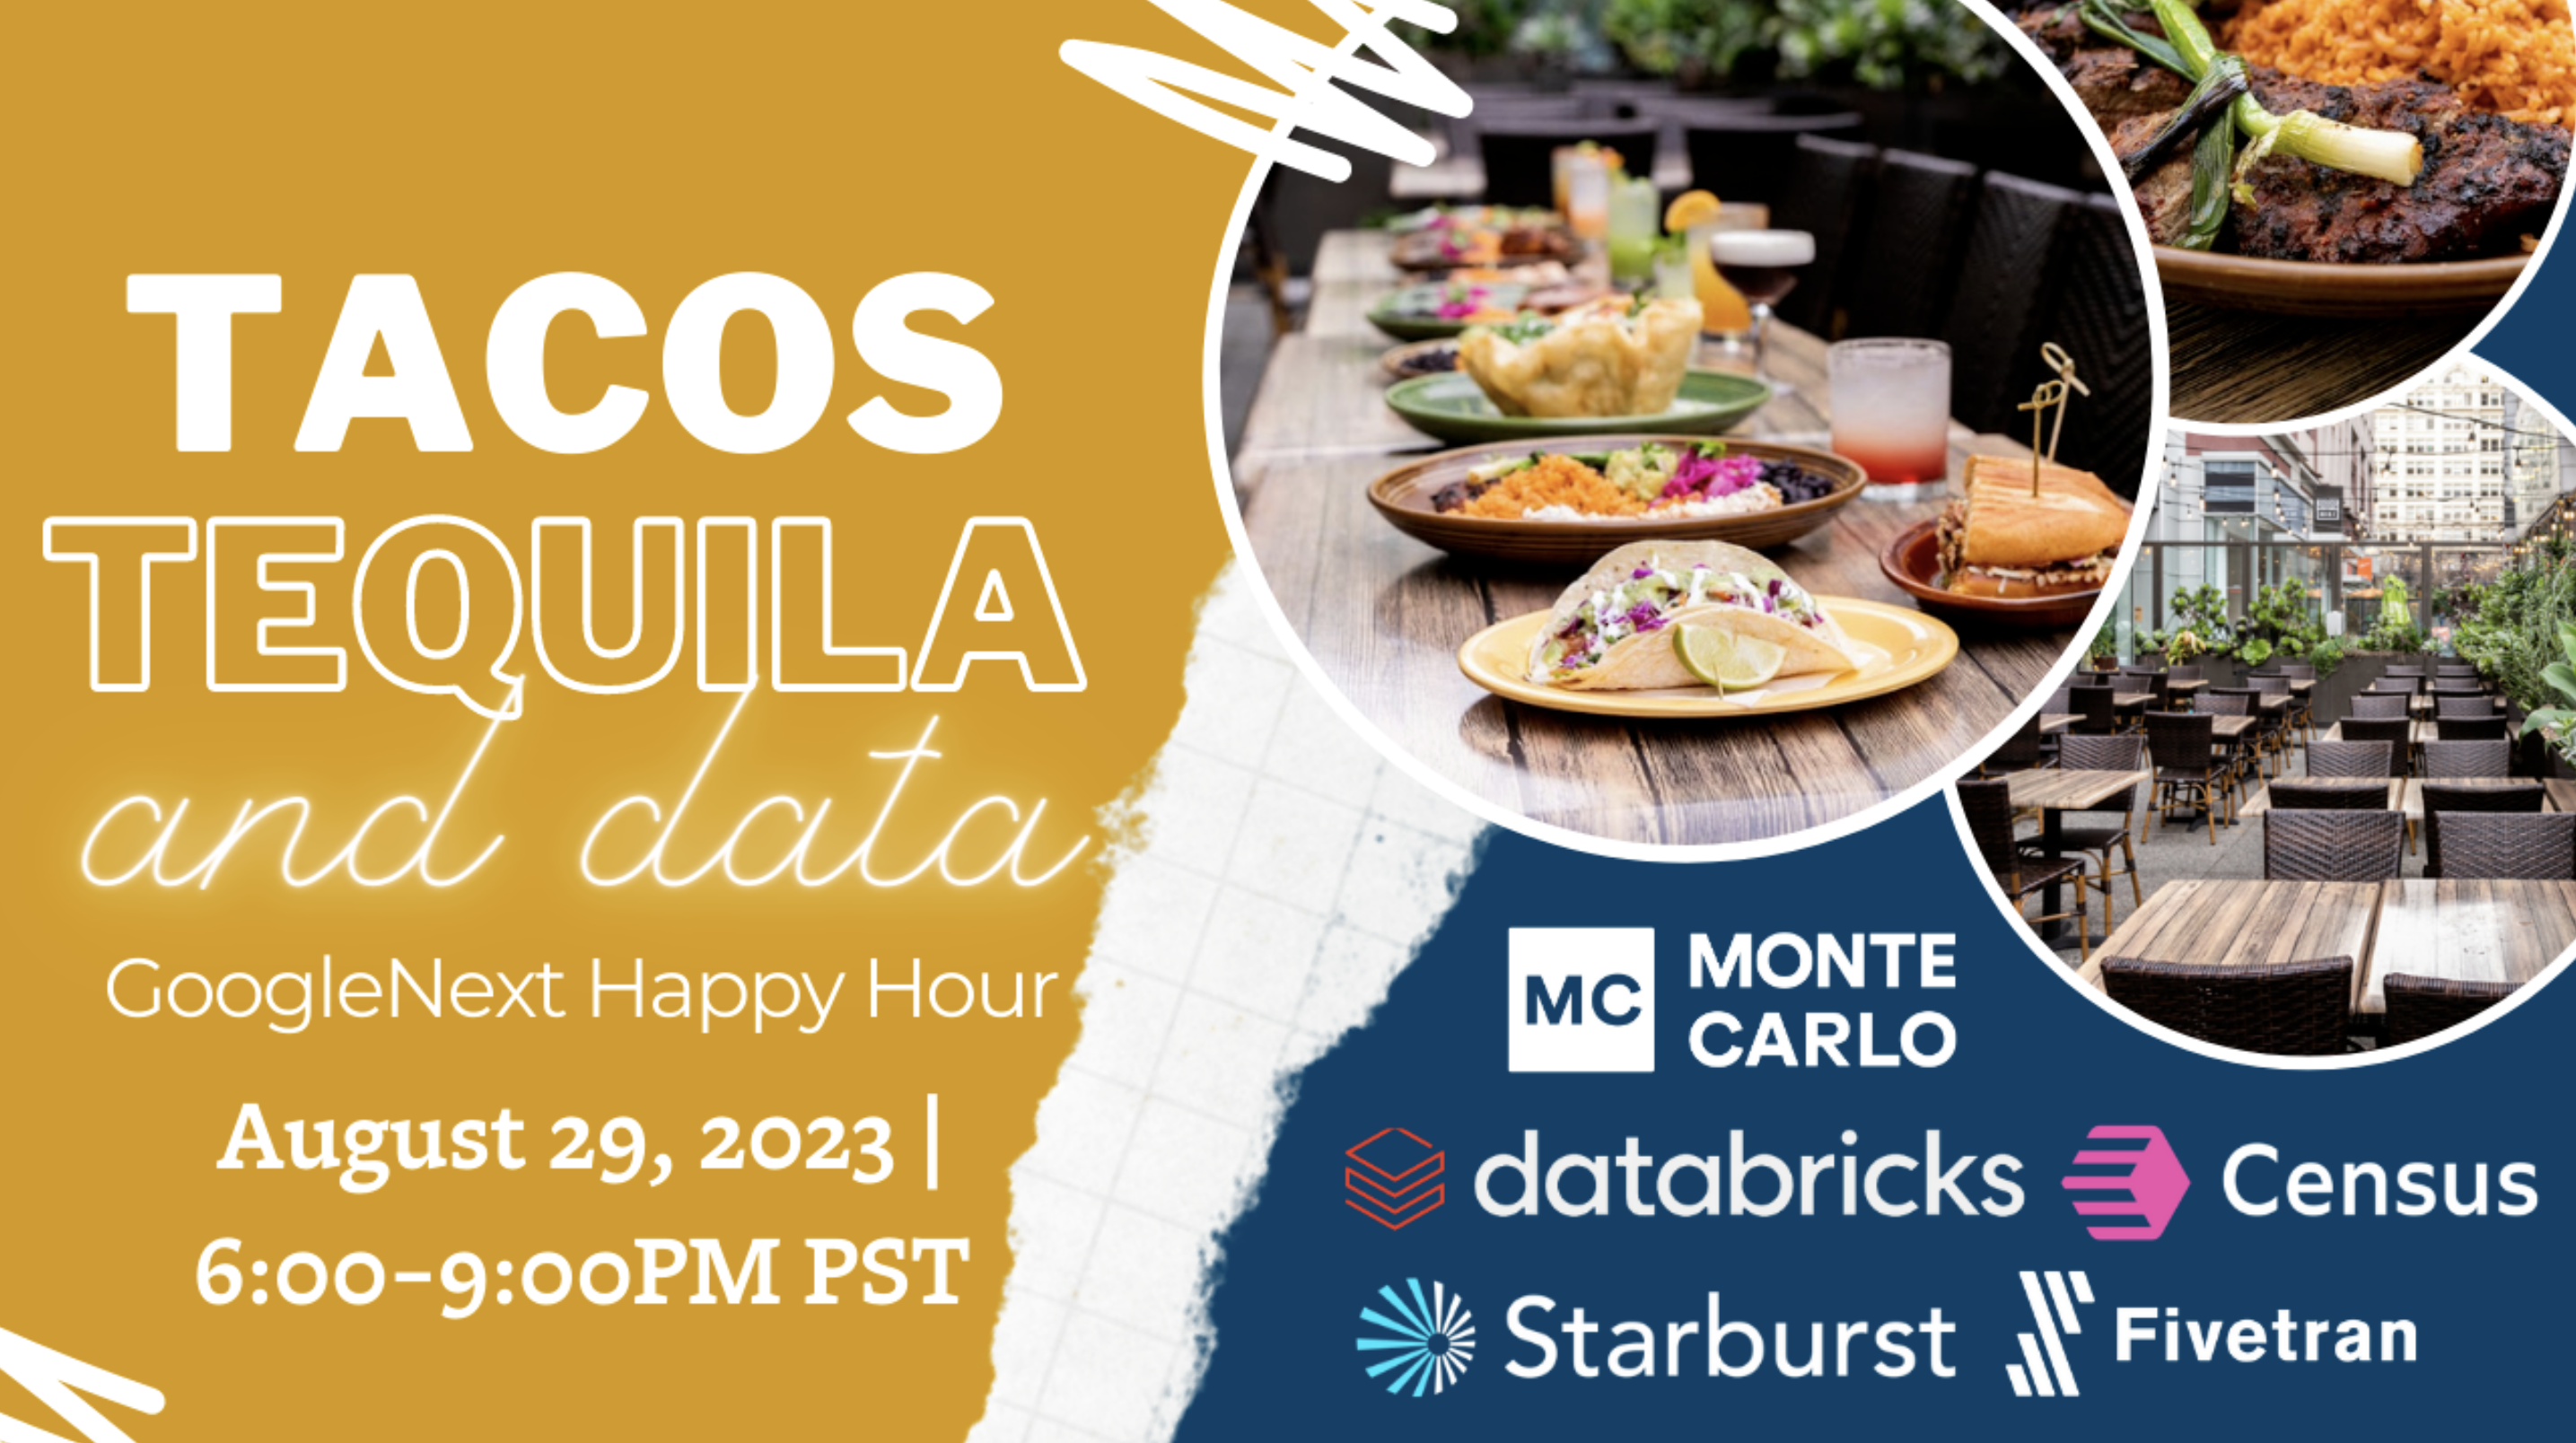 Tacos, Tequila, & Data Happy hour 